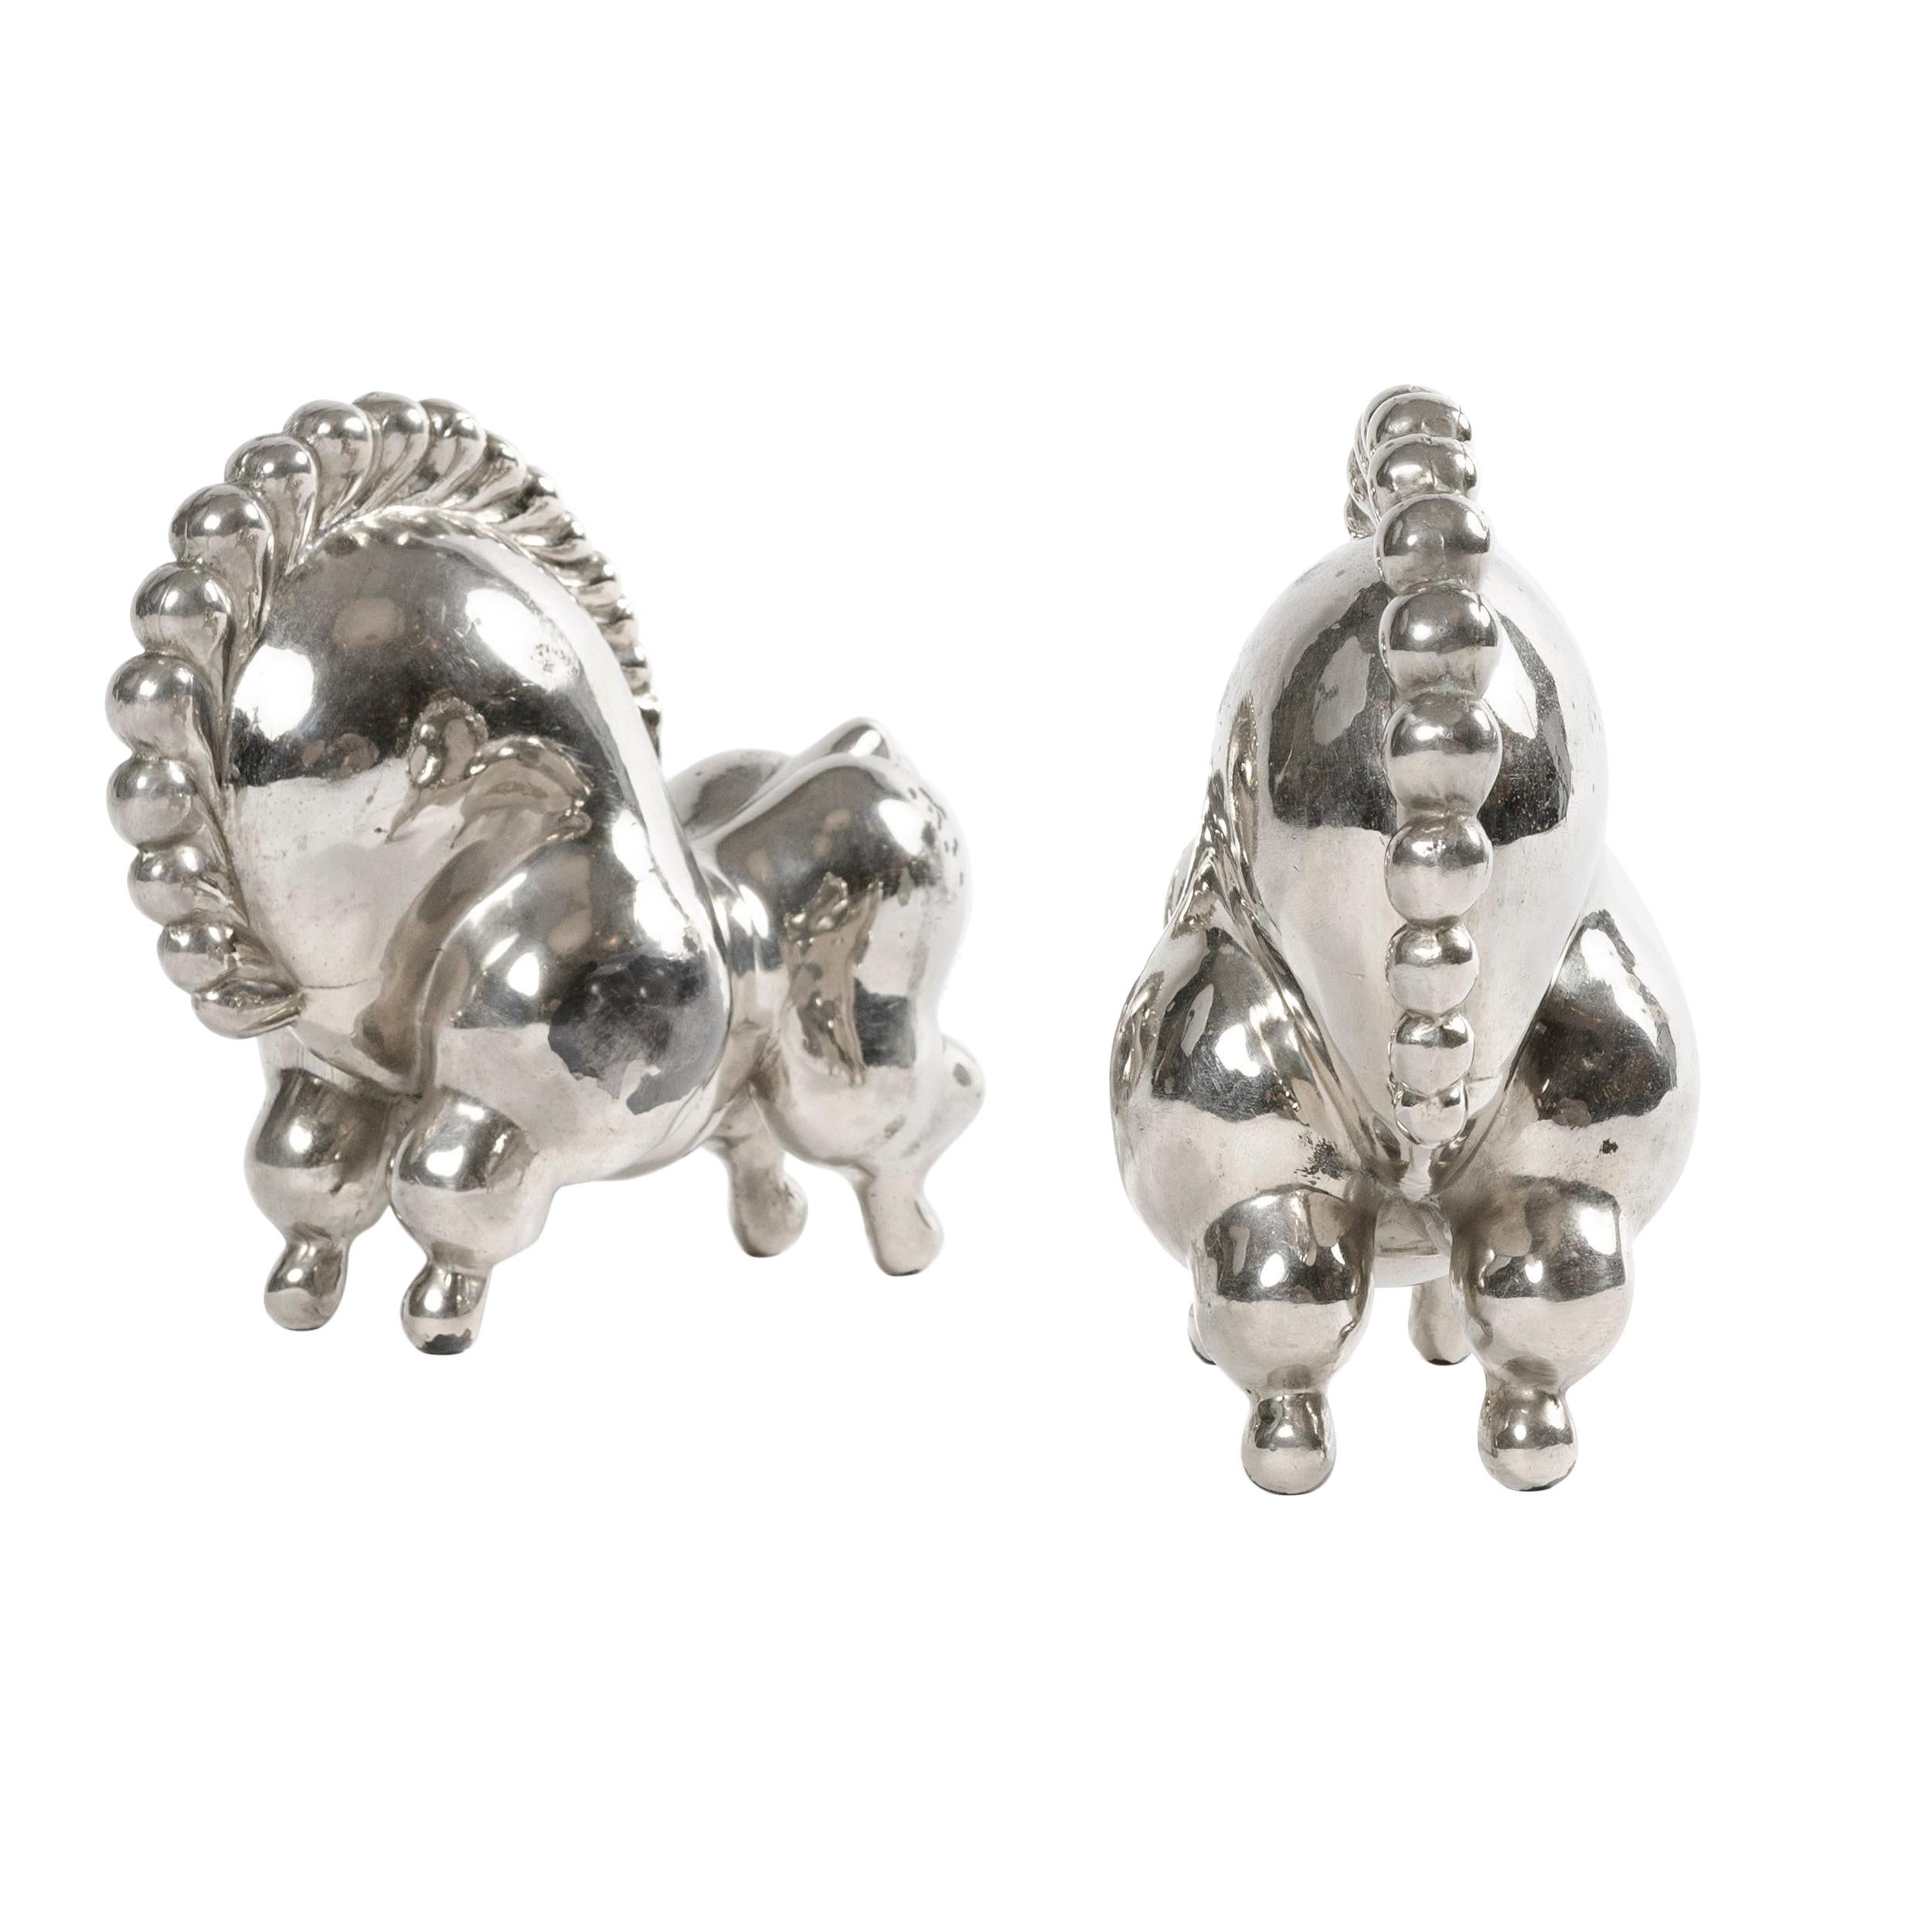 1930s Nickel-Plated 'Libbiloo' Circus Horse Bookends by Russel Wright For Sale